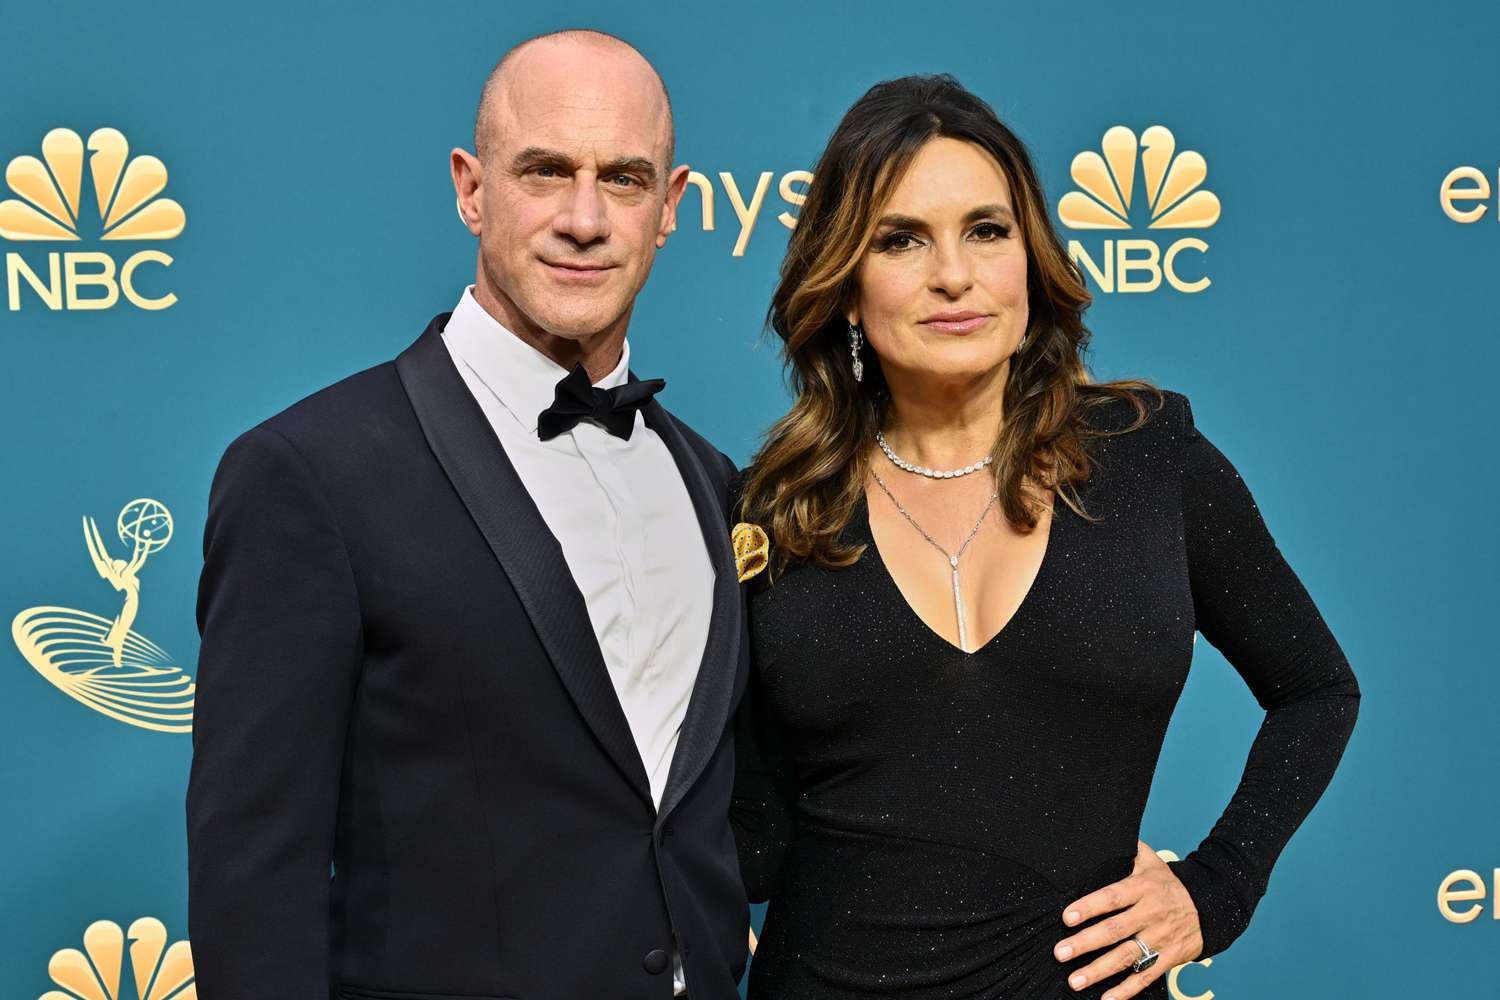 Mariska Hargitay Is 'Planning' a 'Law & Order' Reunion with Christopher Meloni Despite 'Organized Crime''s Move: 'It's Time'